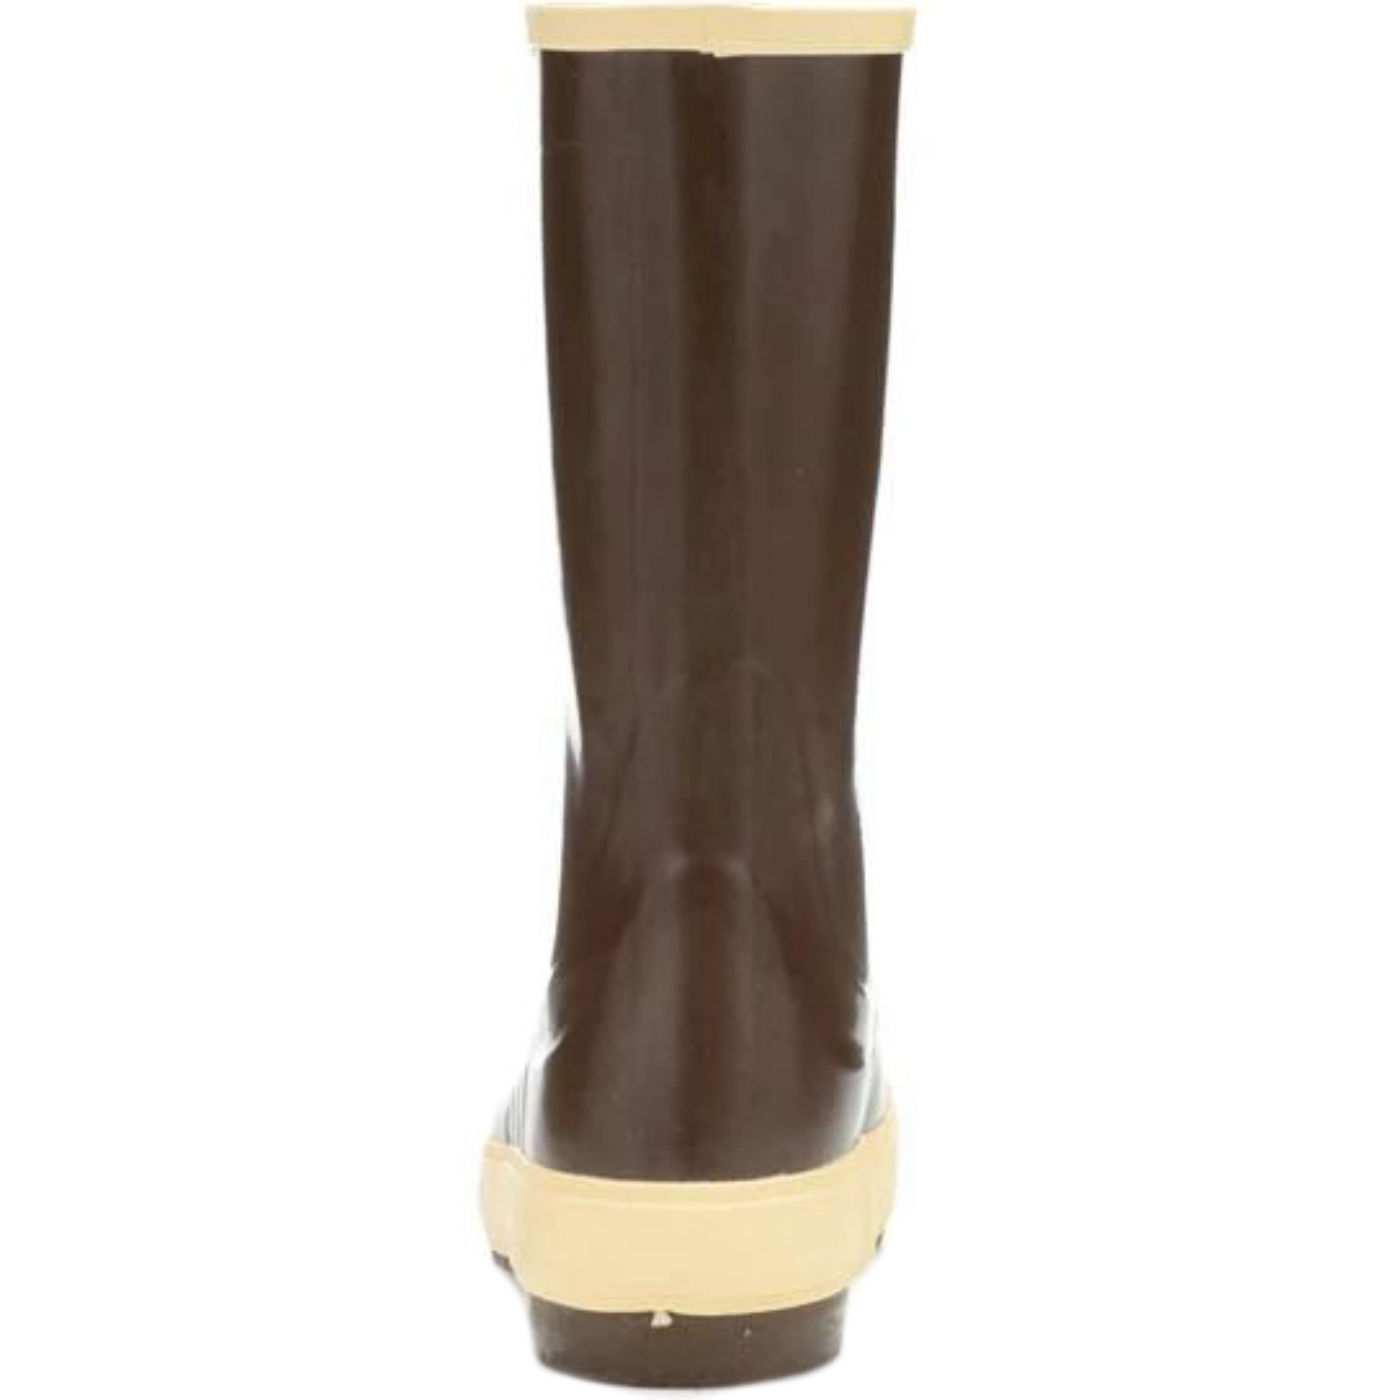 Men's 12 in Legacy Boot Size 10(M) - image 4 of 7